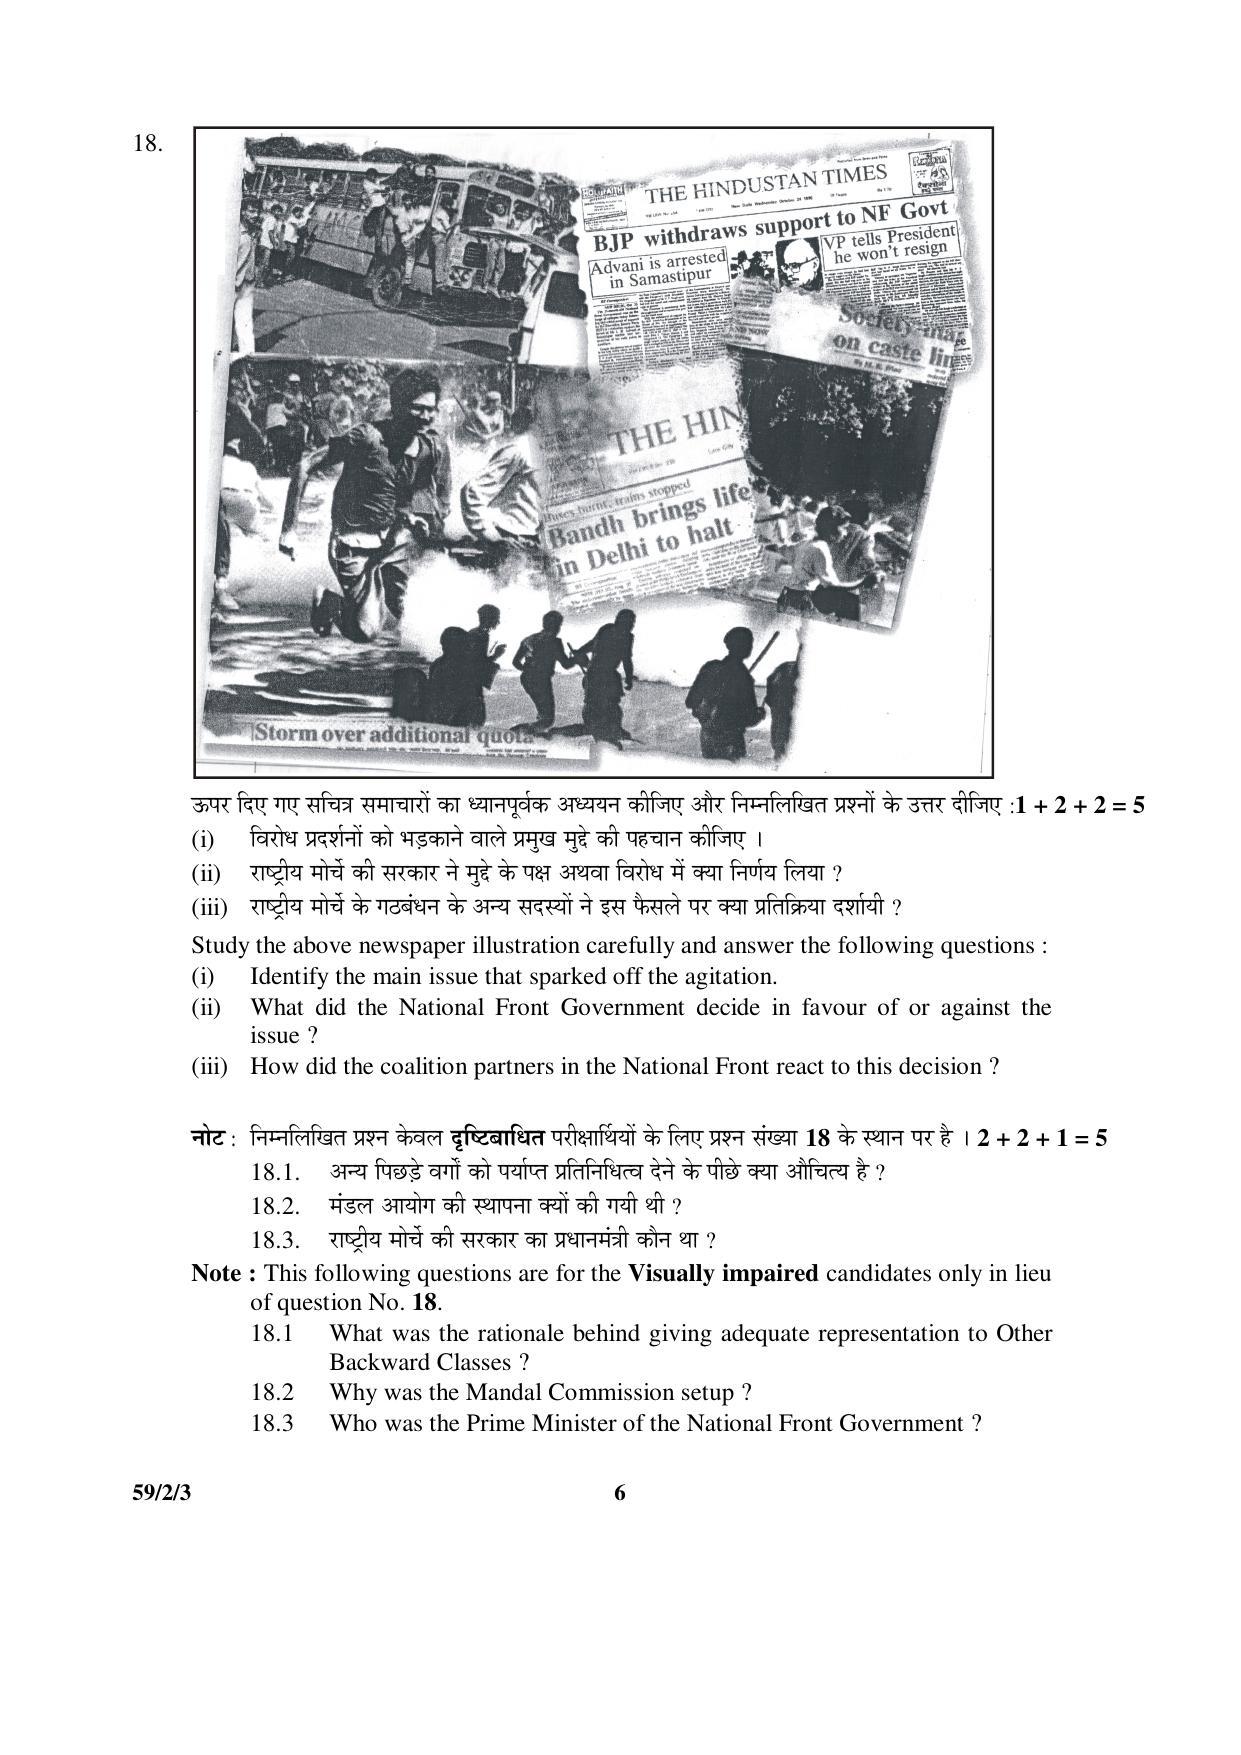 CBSE Class 12 59-2-3 _Political Science 2016 Question Paper - Page 6